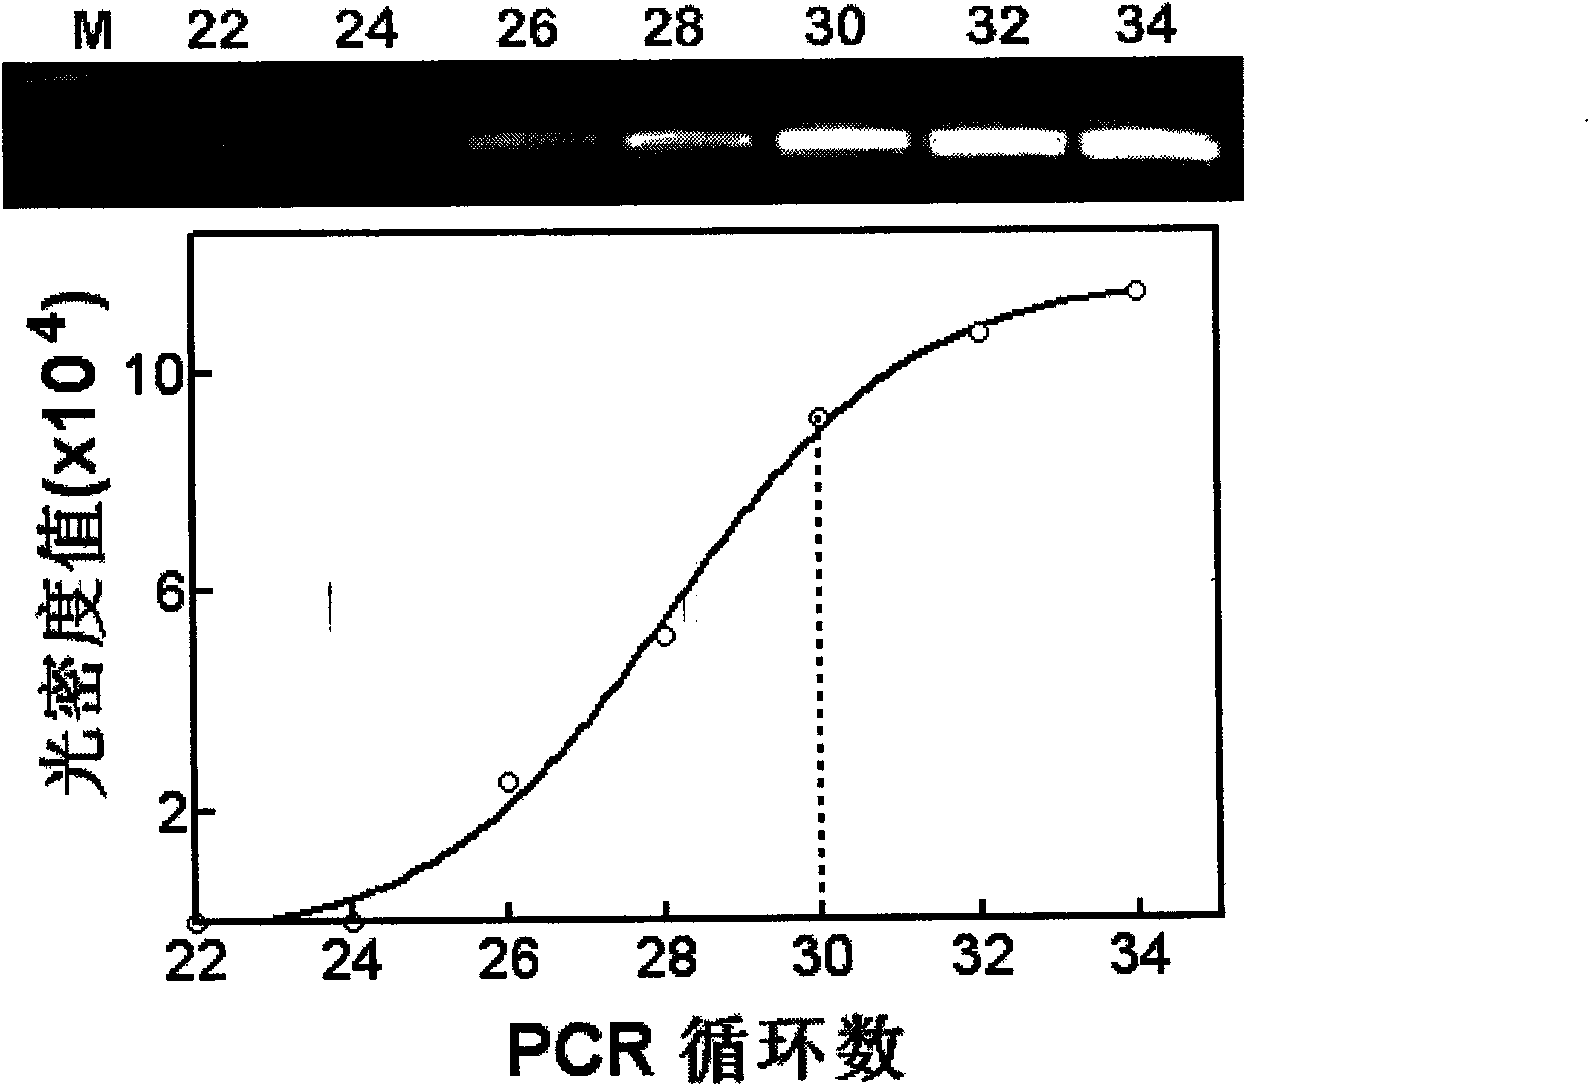 Gene for identifying quality of cotton fiber according to relative expression value